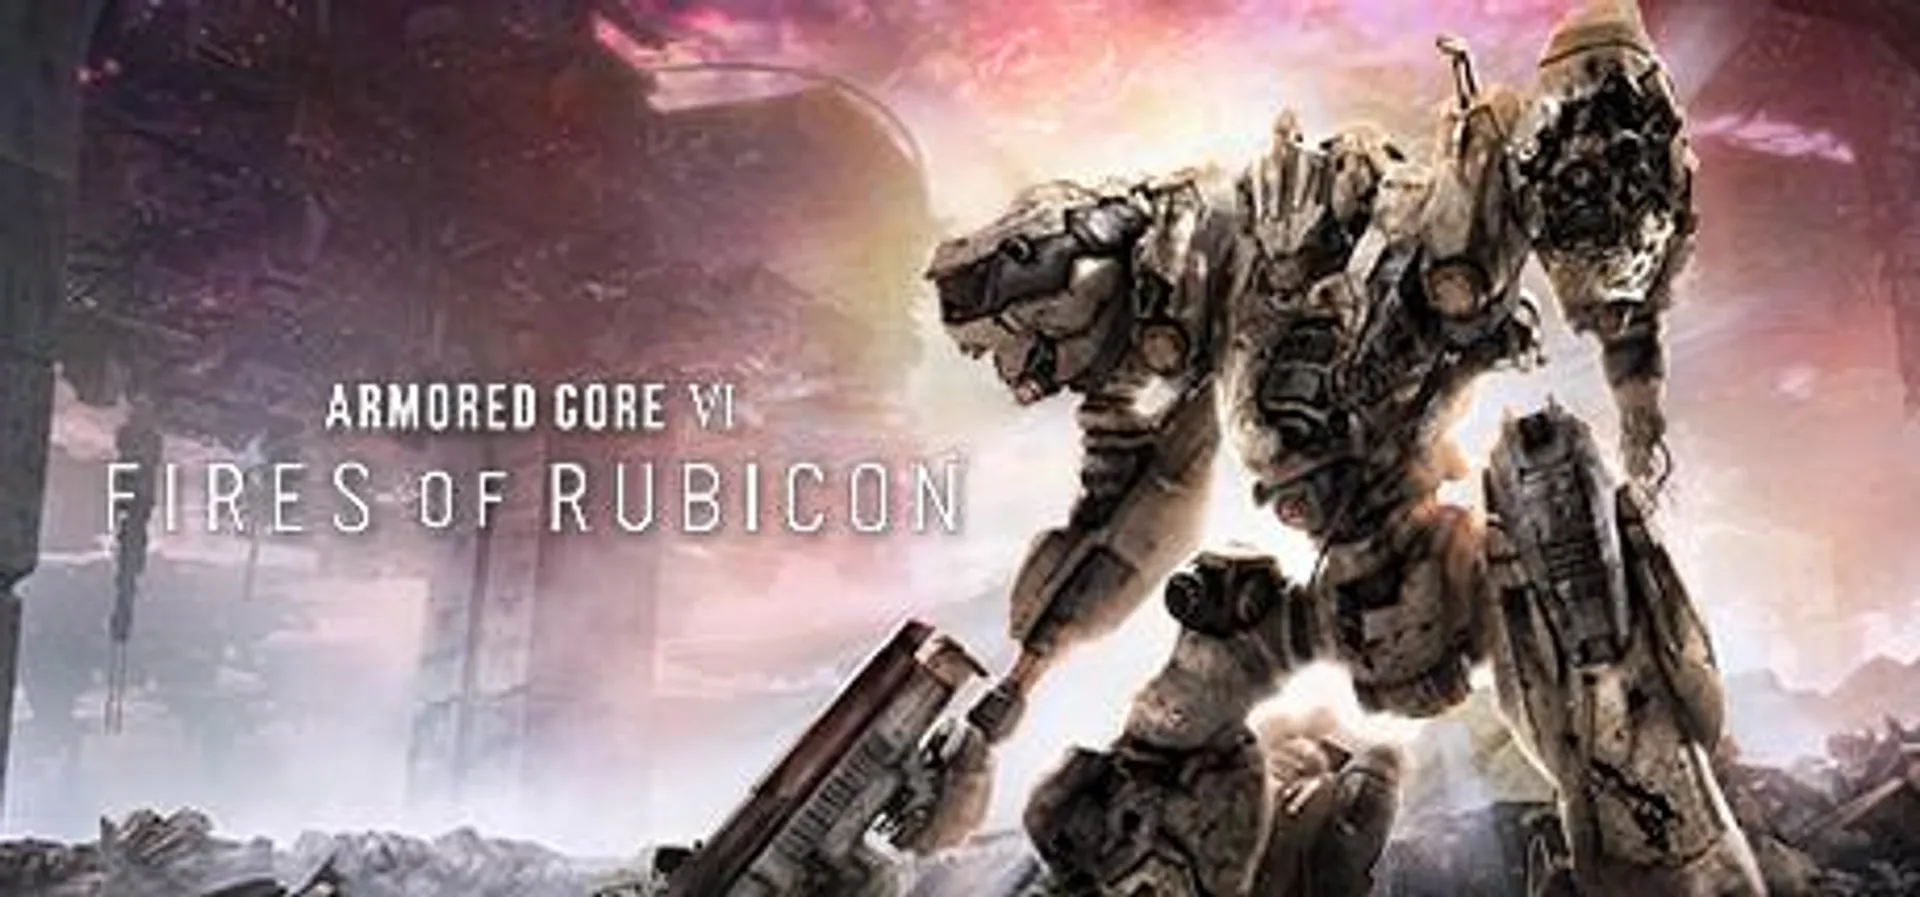 Save 30% on ARMORED CORE™ VI FIRES OF RUBICON™ on Steam